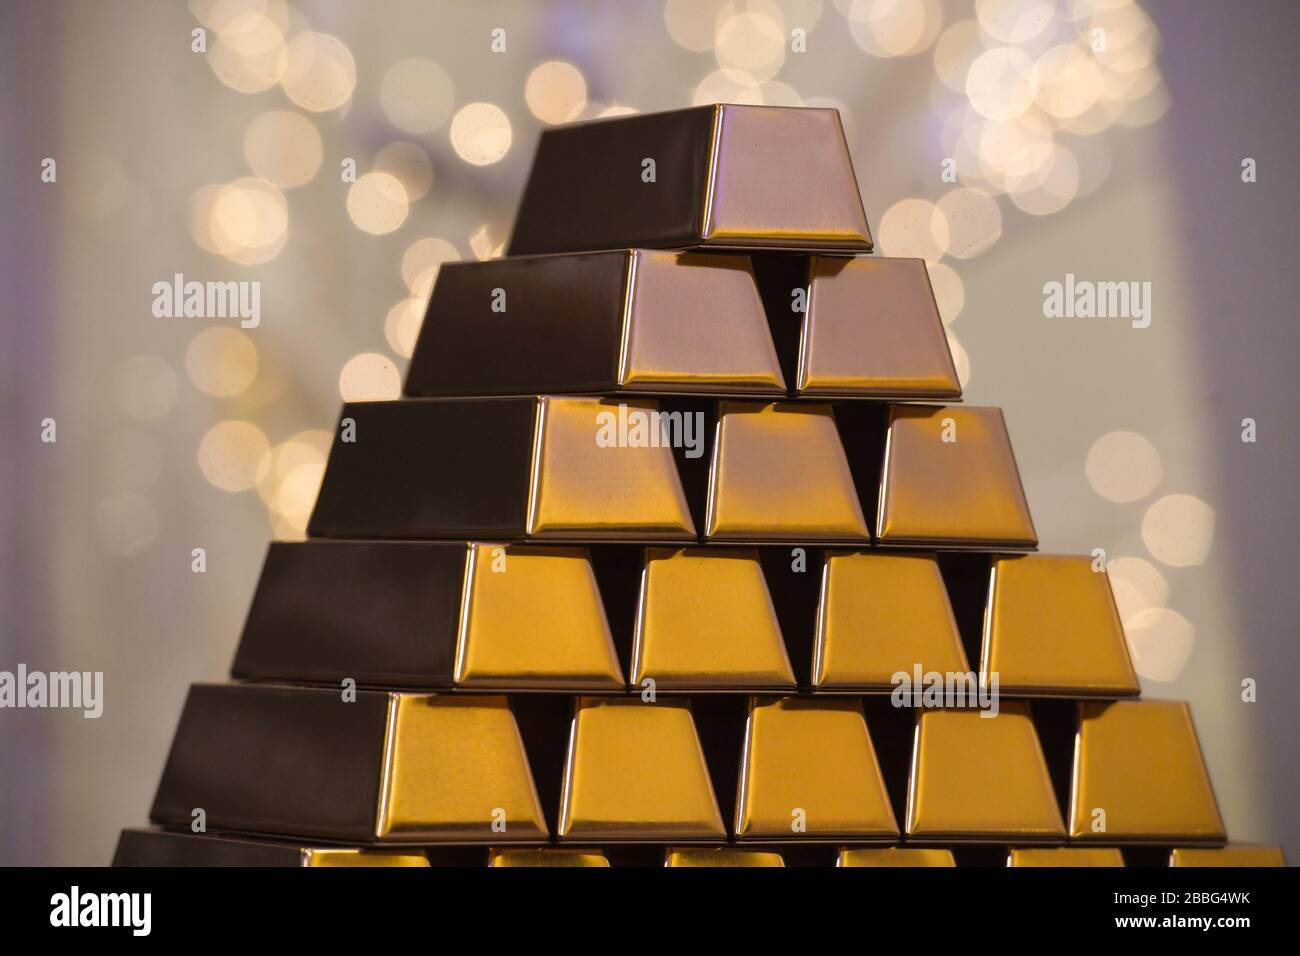 Gold ingots stacked in pyramid Stock Photo